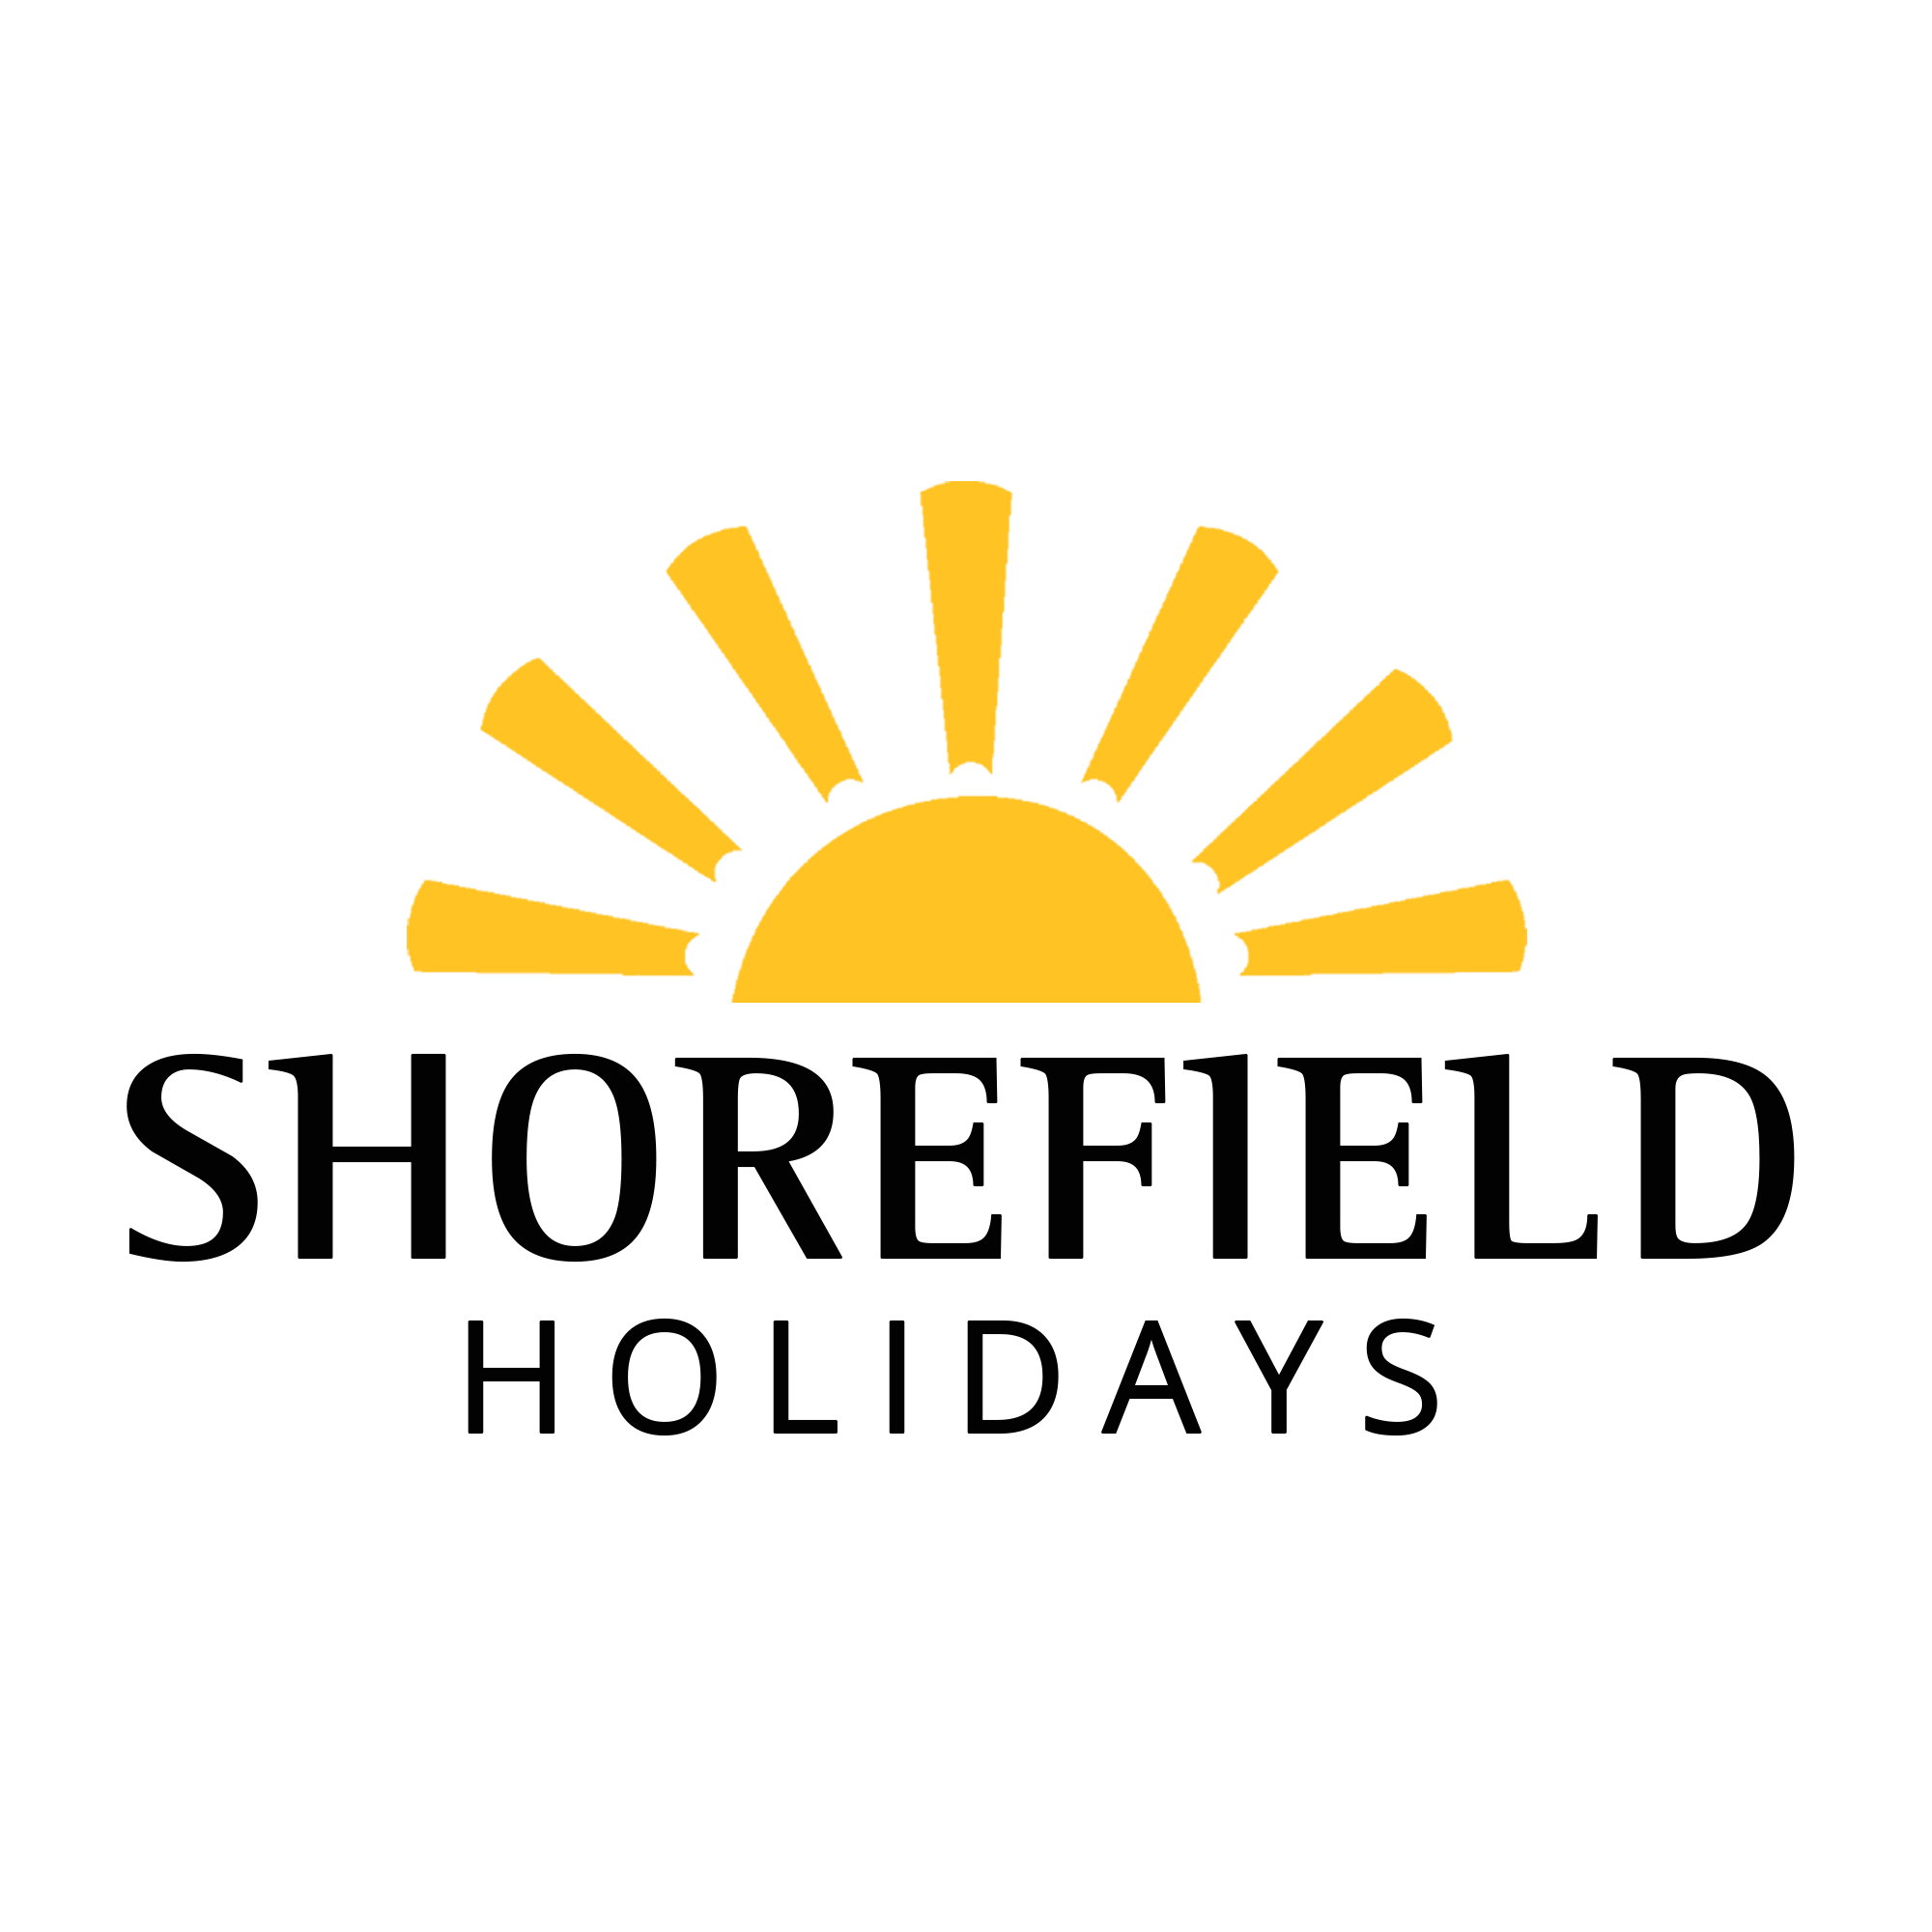 Enjoy an extra 5% off all self catering breaks at Shorefield Holidays